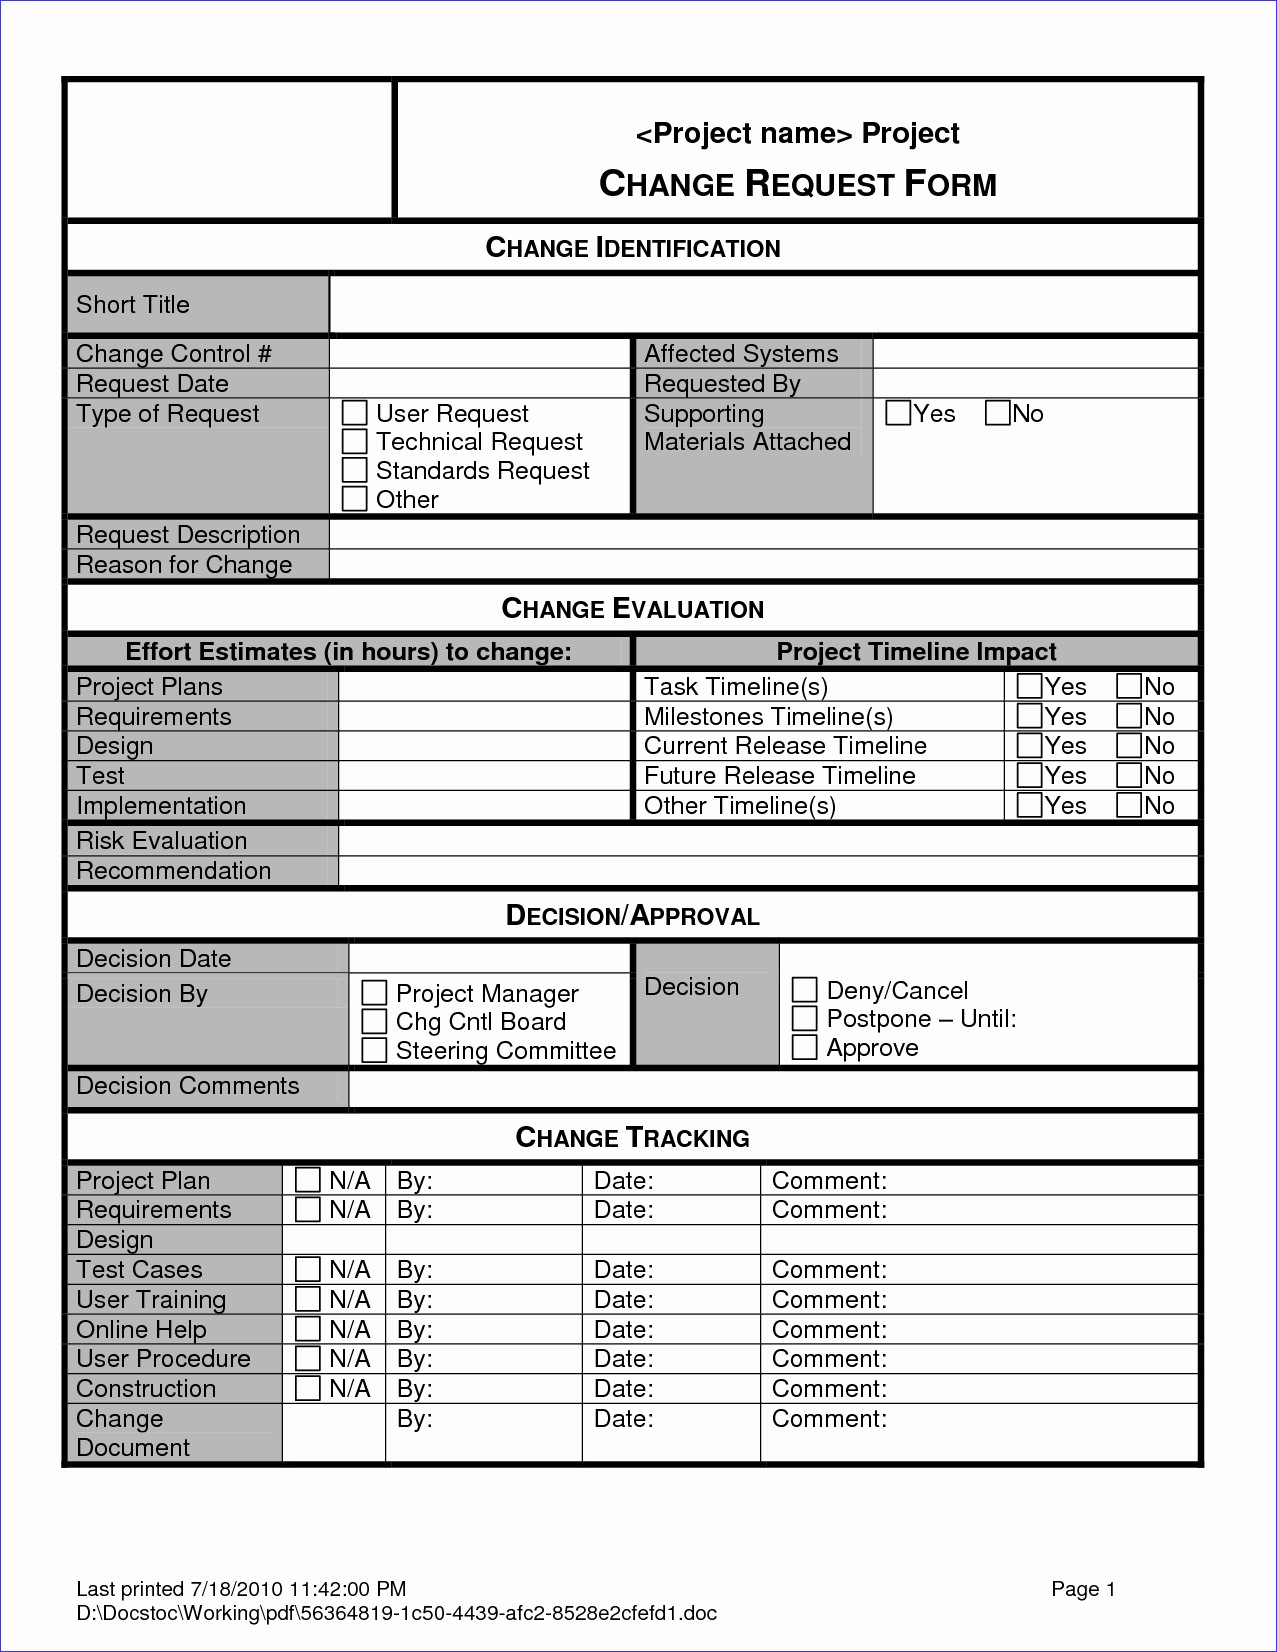 Change Management form Template Lovely Change Management form Template Portablegasgrillweber